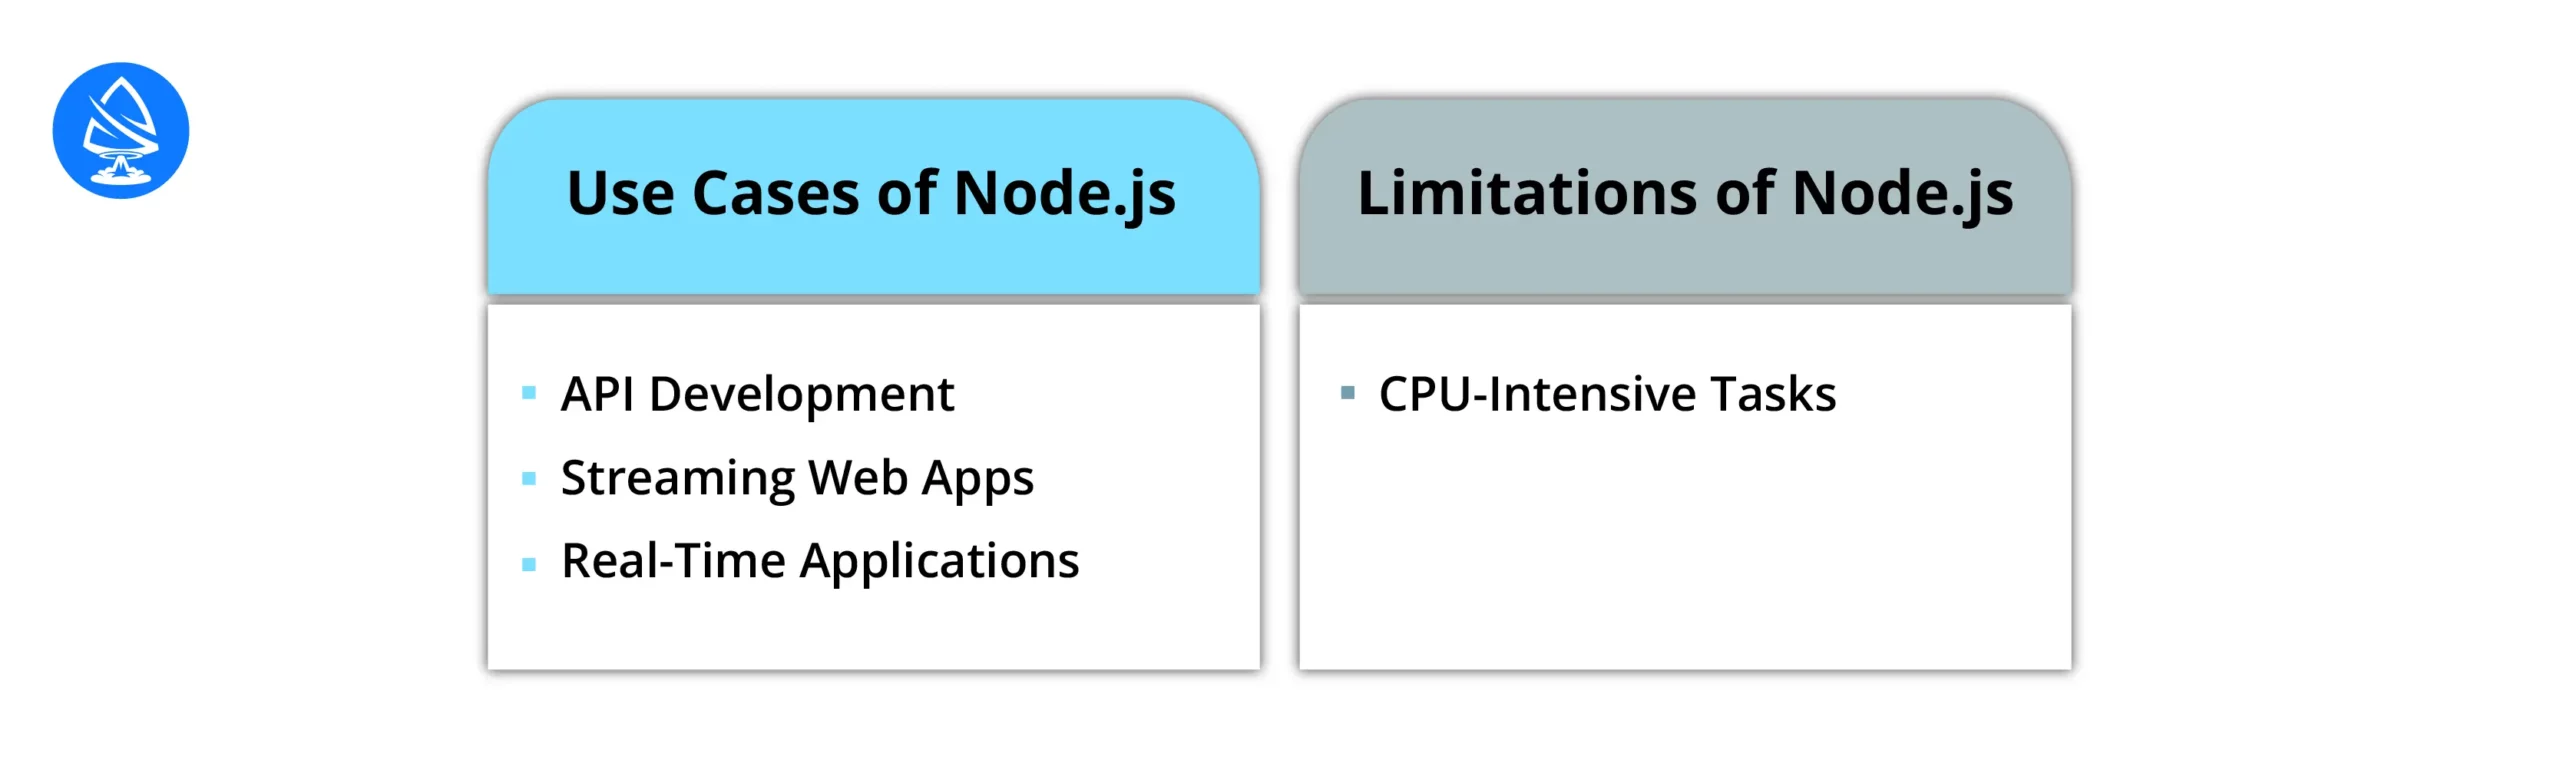 Use Cases of Node.js 